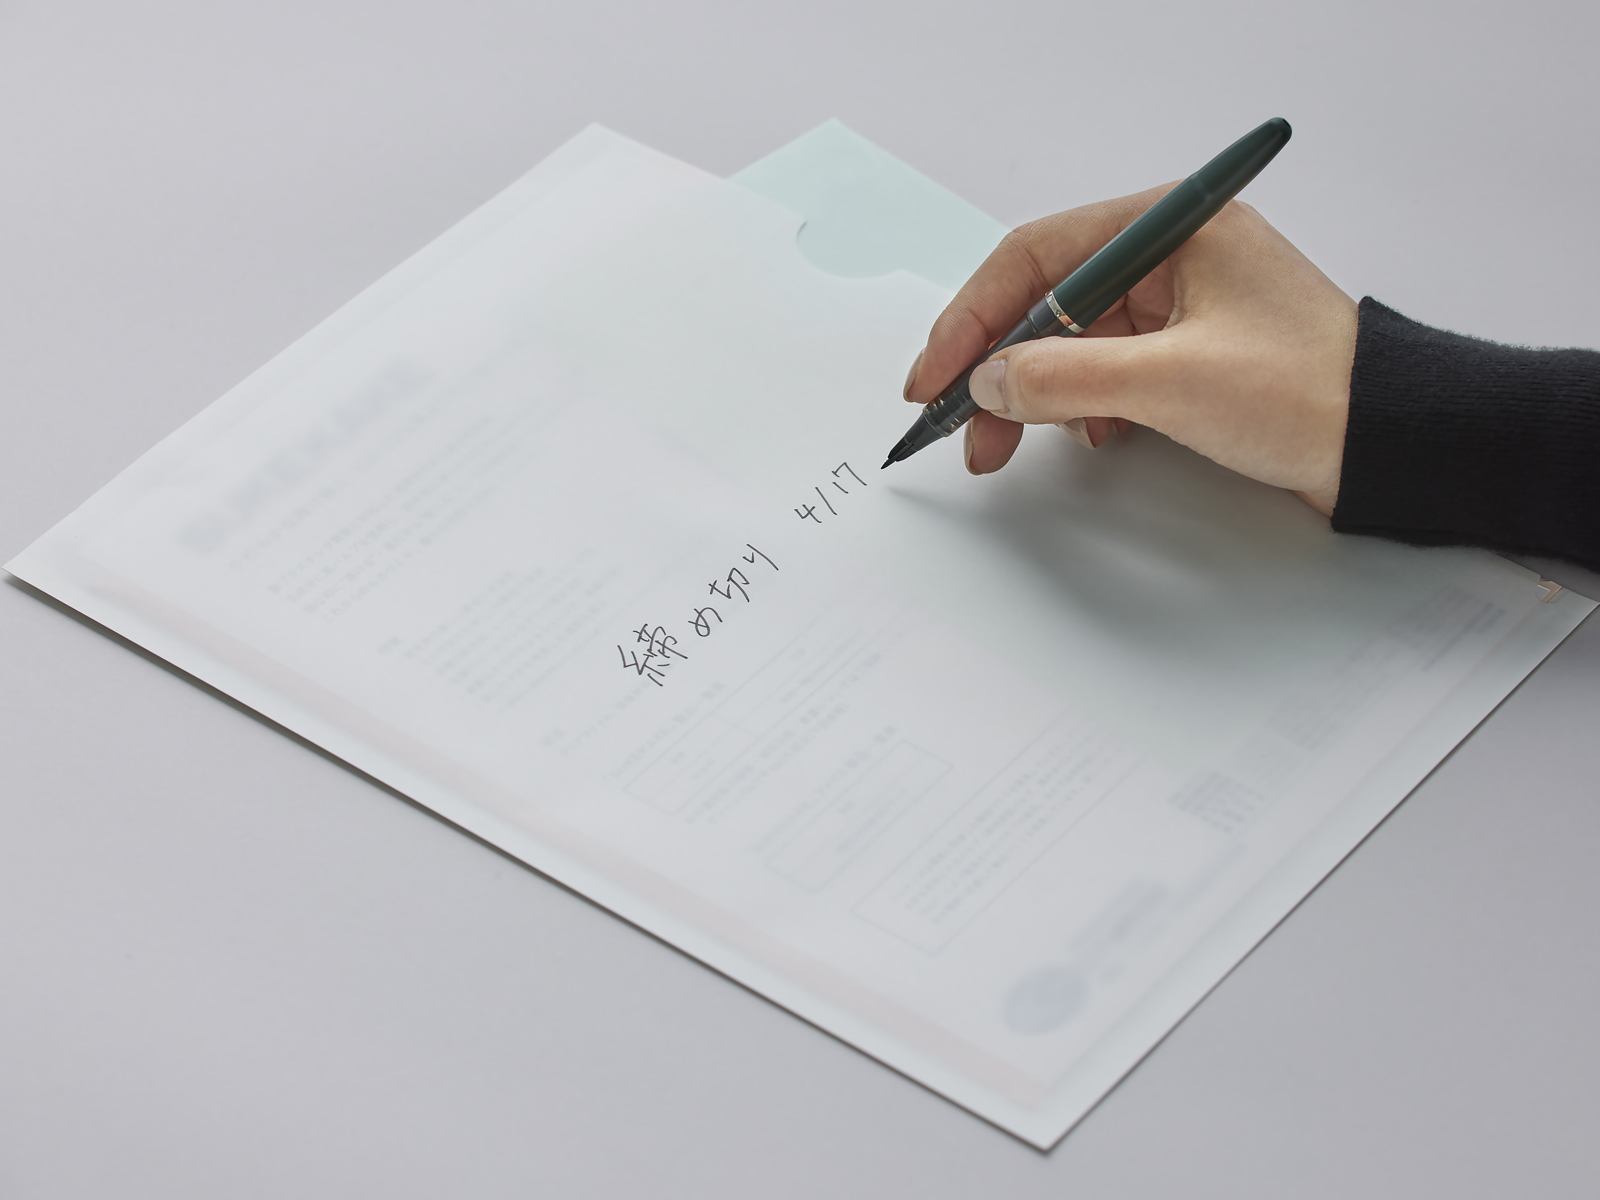 Newly developed transparent, writable specialty paper launched, News  Release